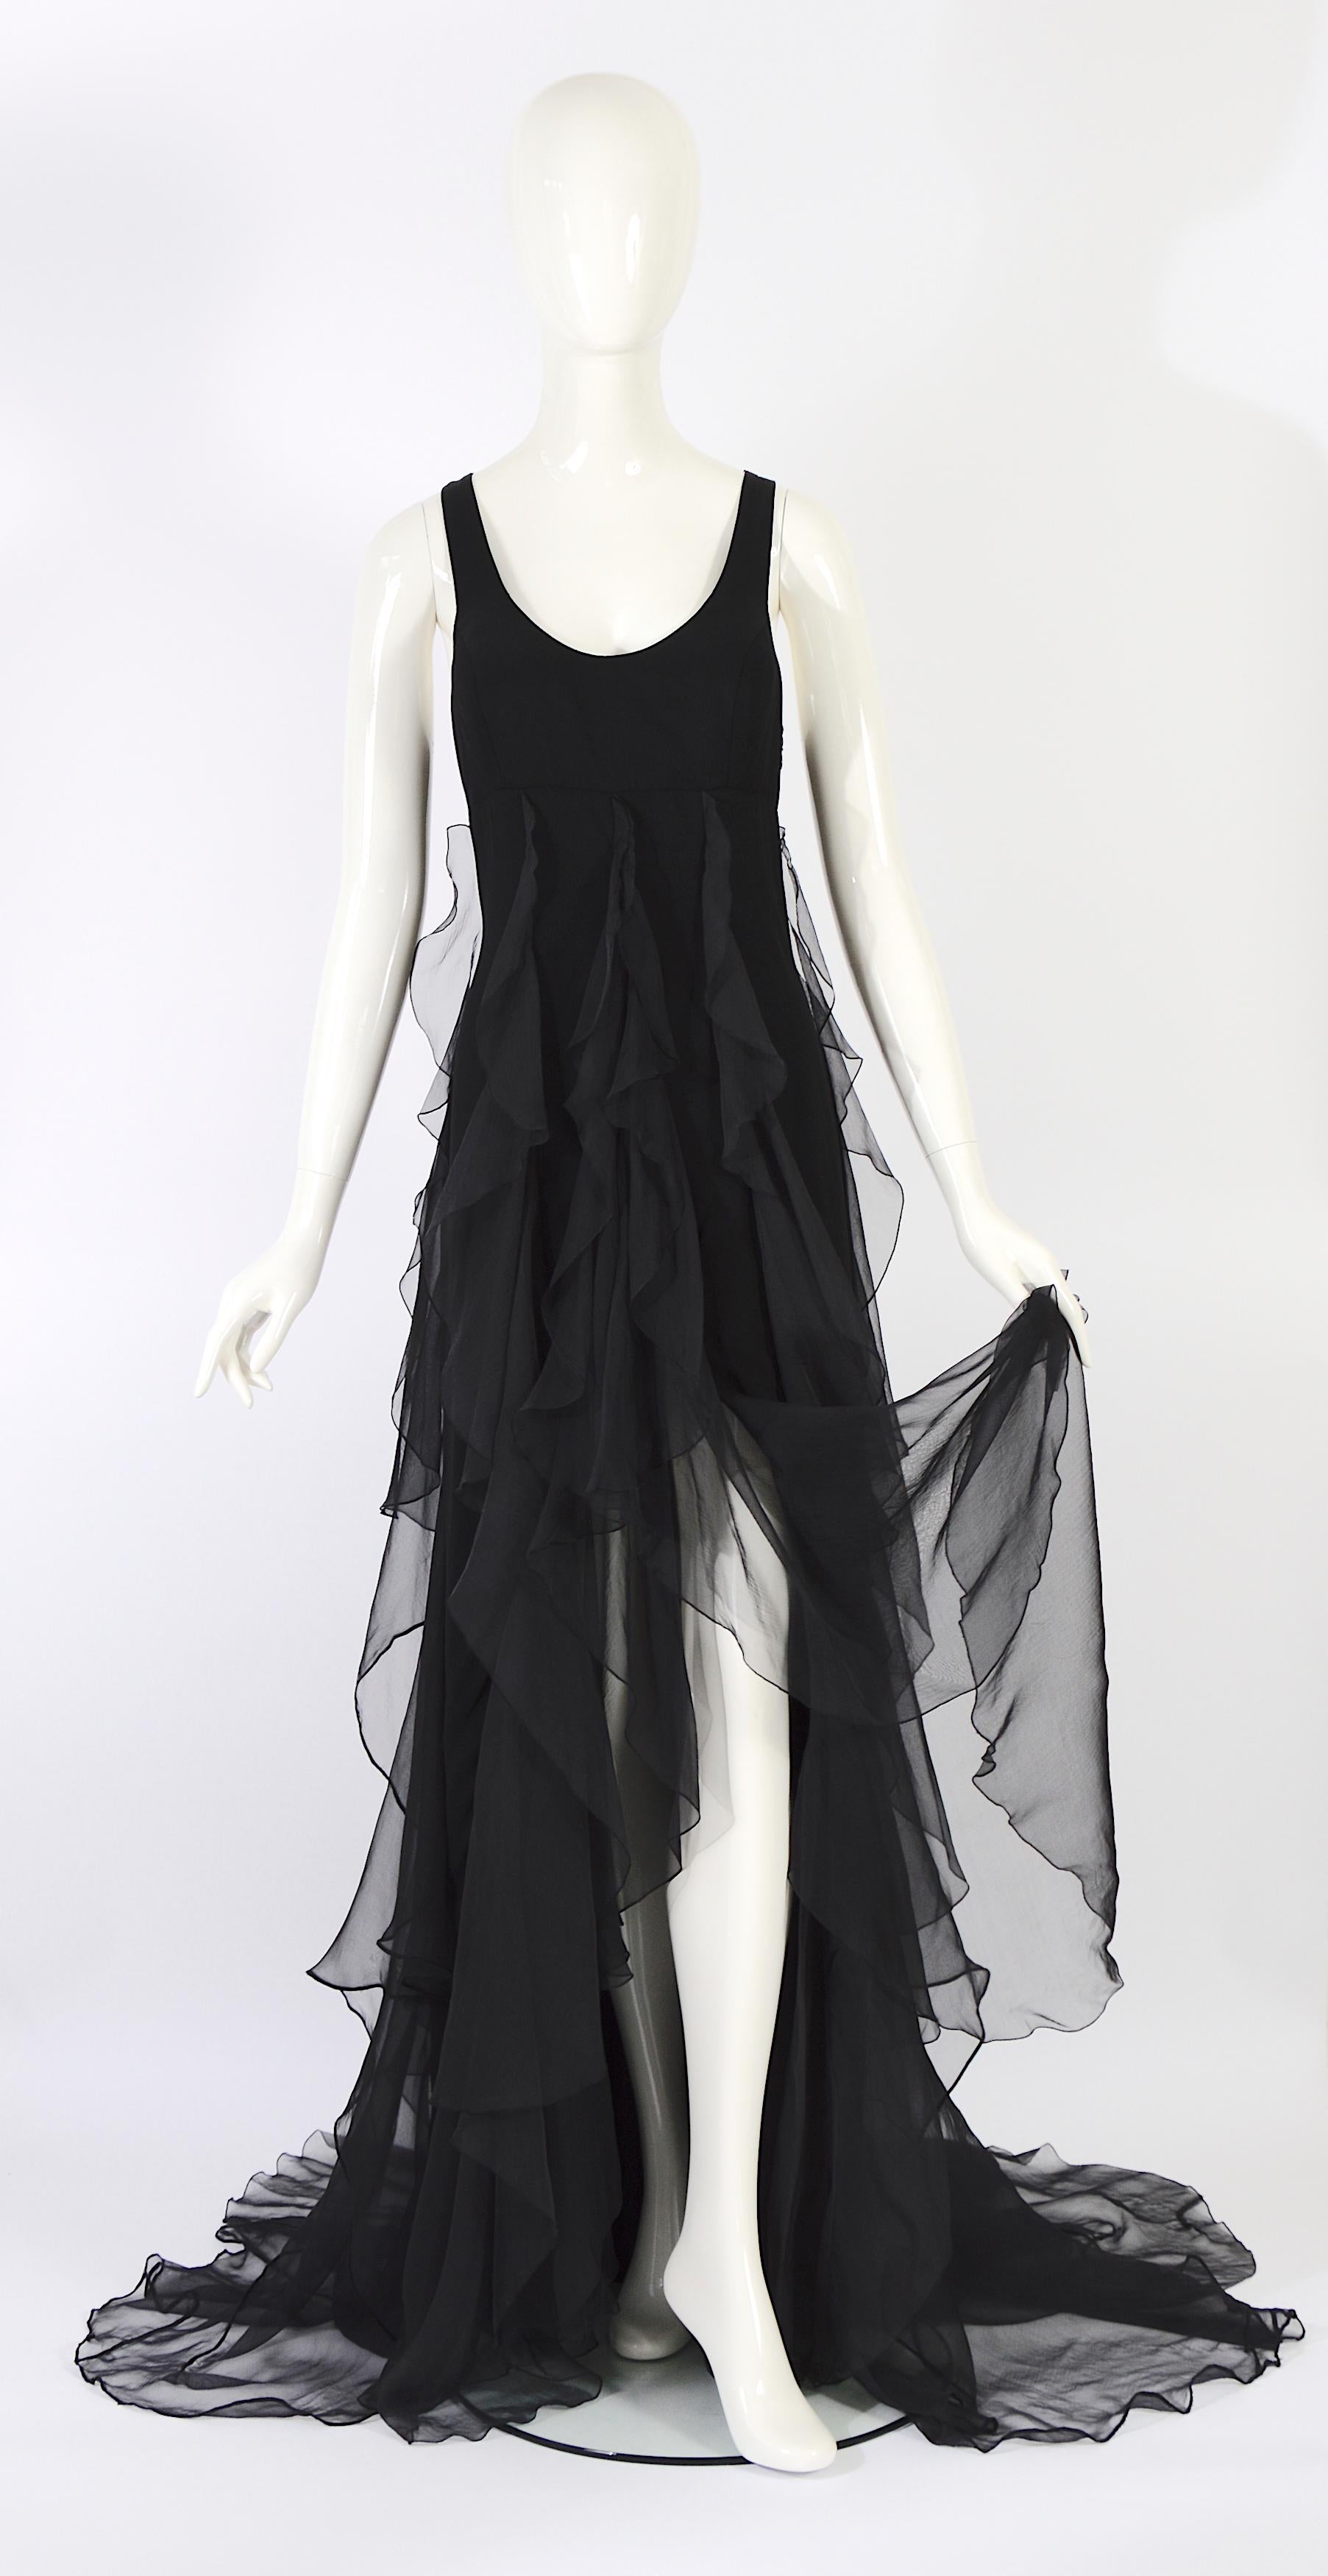 Christian Dior by Gianfranco Ferre S/S 1994 vintage black silk evening dress For Sale 6